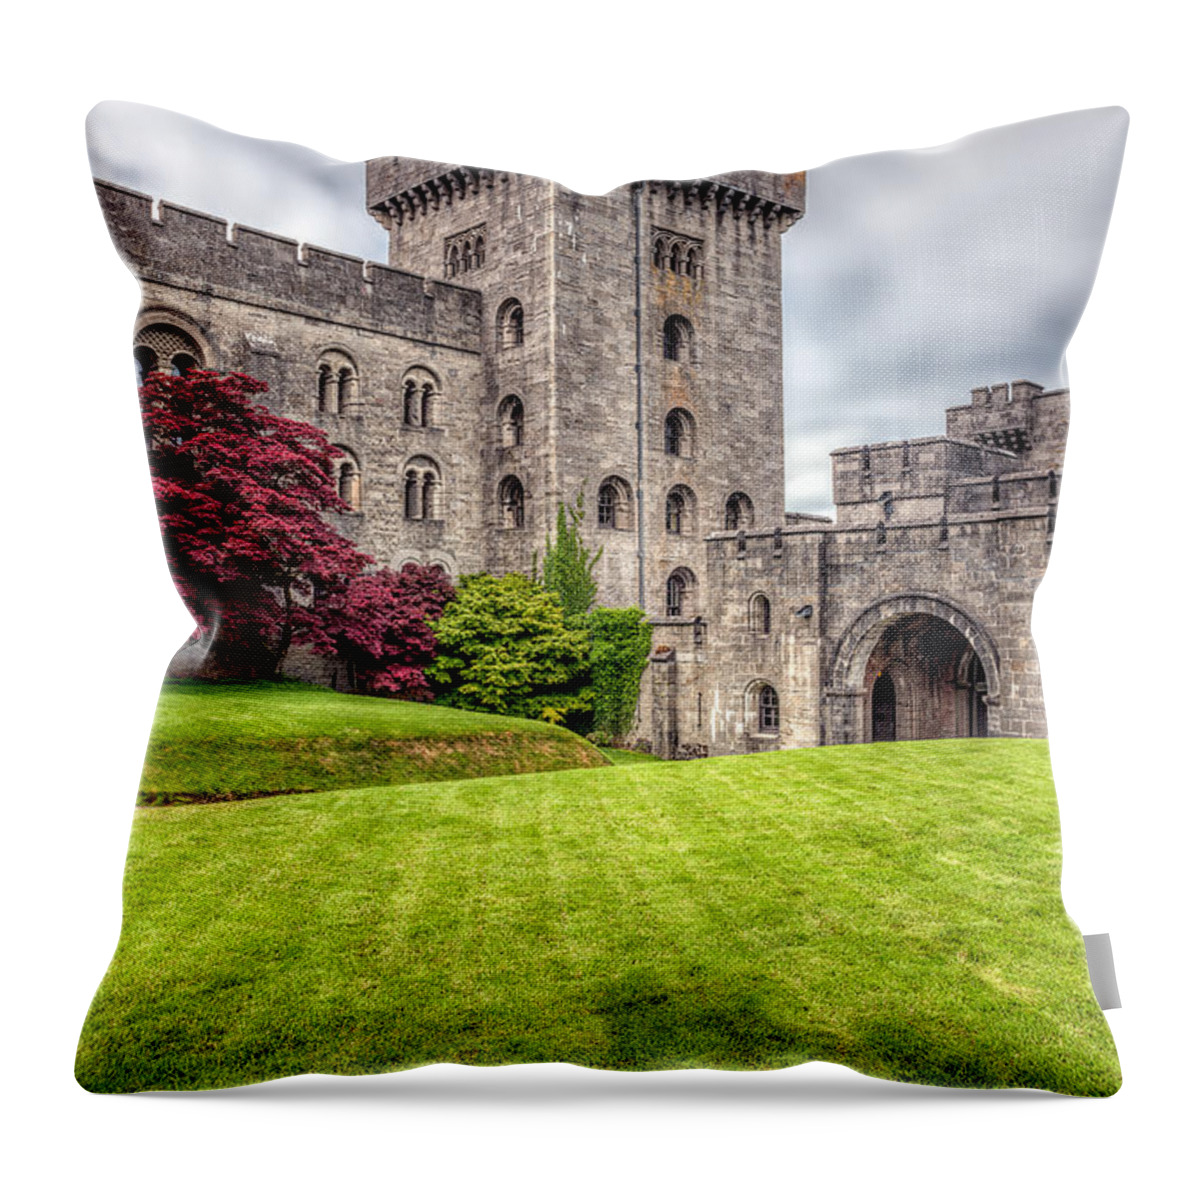 Arch Throw Pillow featuring the photograph Castle Grounds by Adrian Evans